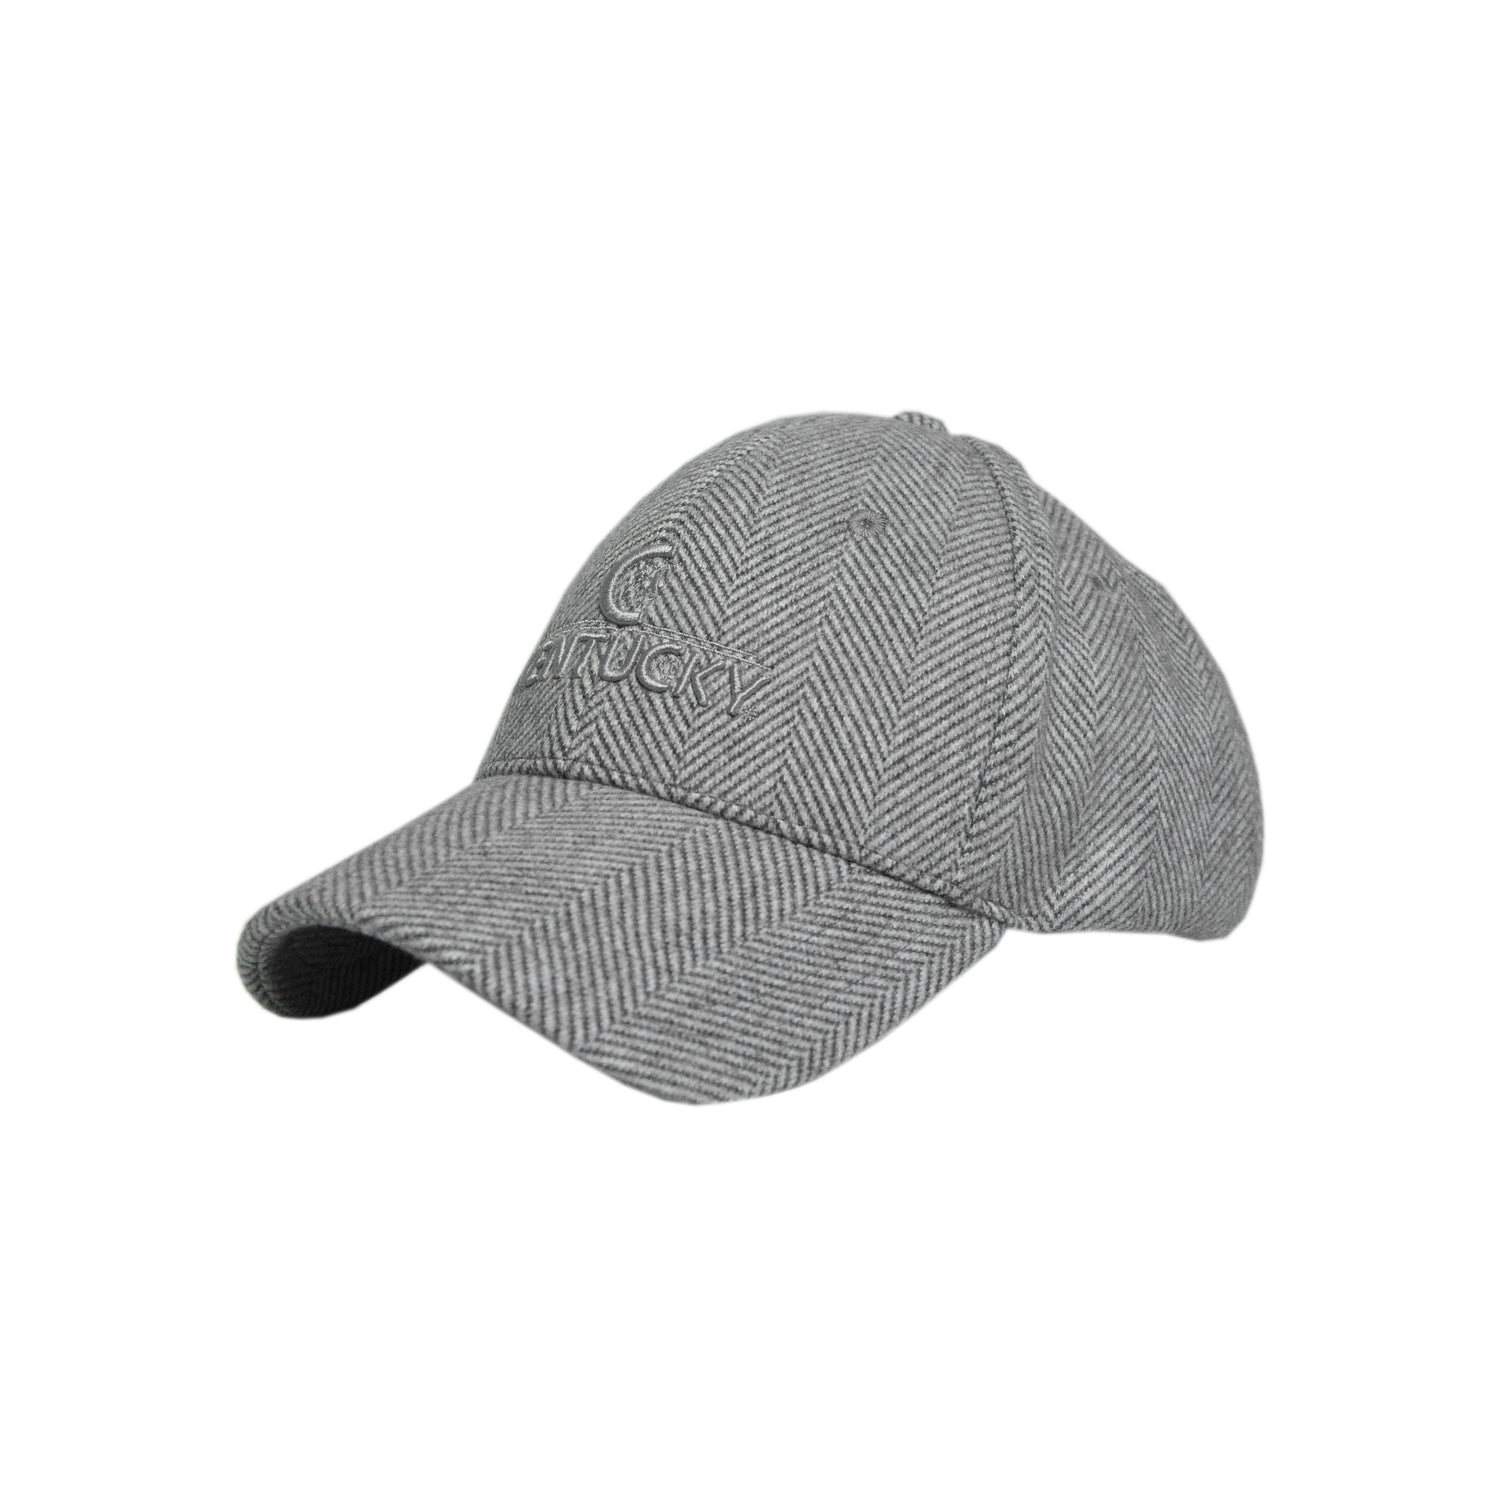 The herringbone wool Kentucky cap is perfect accompaniment to any outfit. Self coloured Kentucky logo and fully adjustable. 